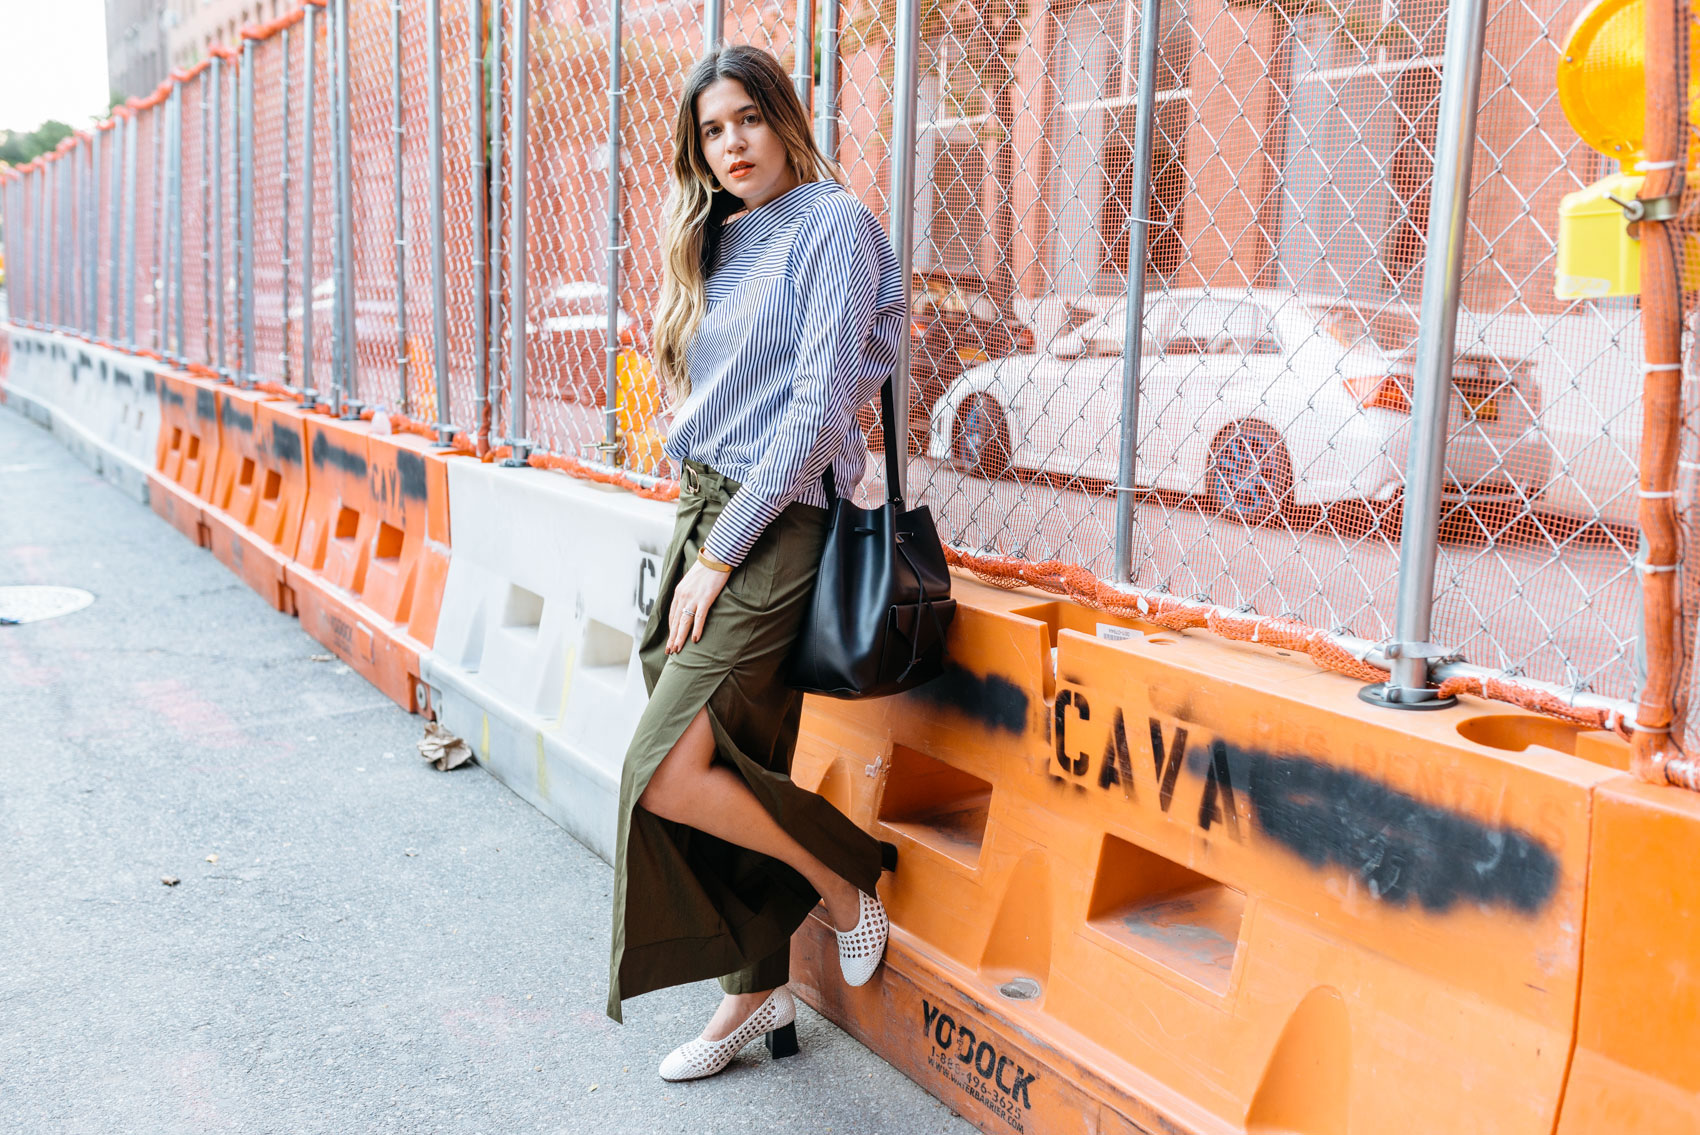 Maristella wearing a deconstructed open sleeve shirt, slit wide olive pants, Sandro braided shoes and a black bucket bag in NYFW